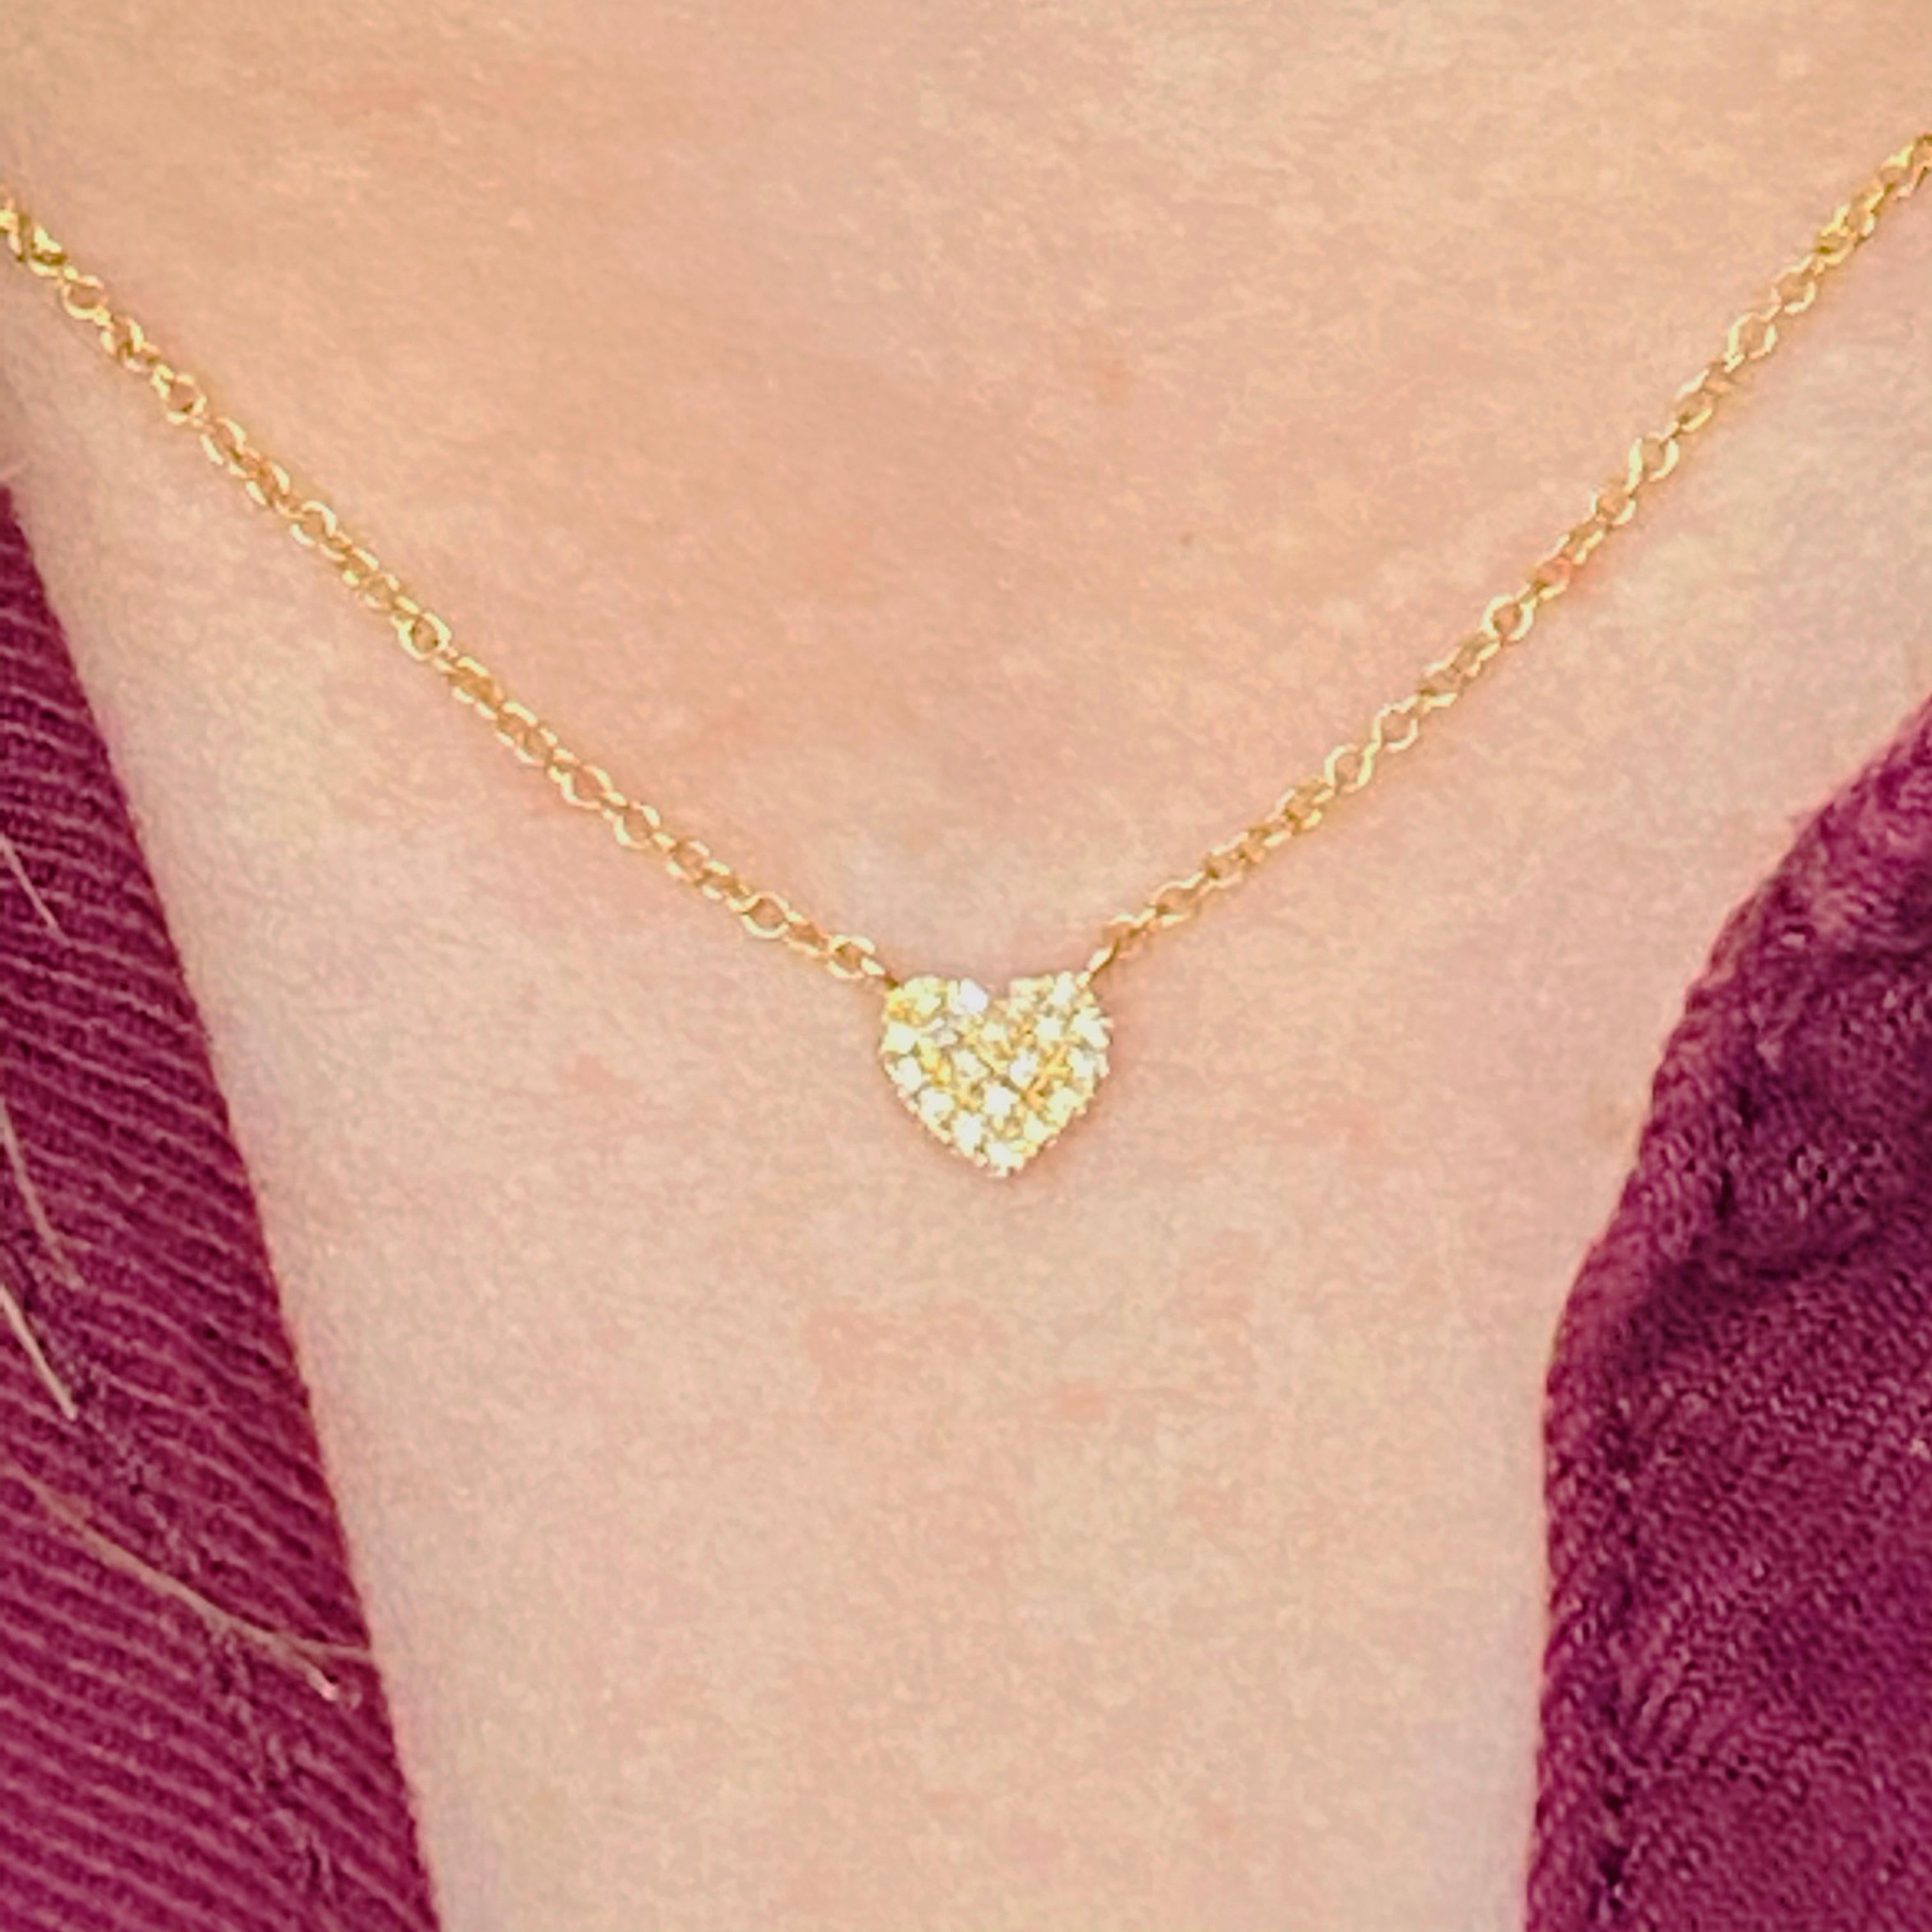 This gorgeous 14k yellow gold heart pendant with pave diamonds is sure to put a smile on anyone's face! This necklace looks beautiful worn by itself and also looks wonderful in a necklace stack. Its amazing adjustable chain design allows it to be